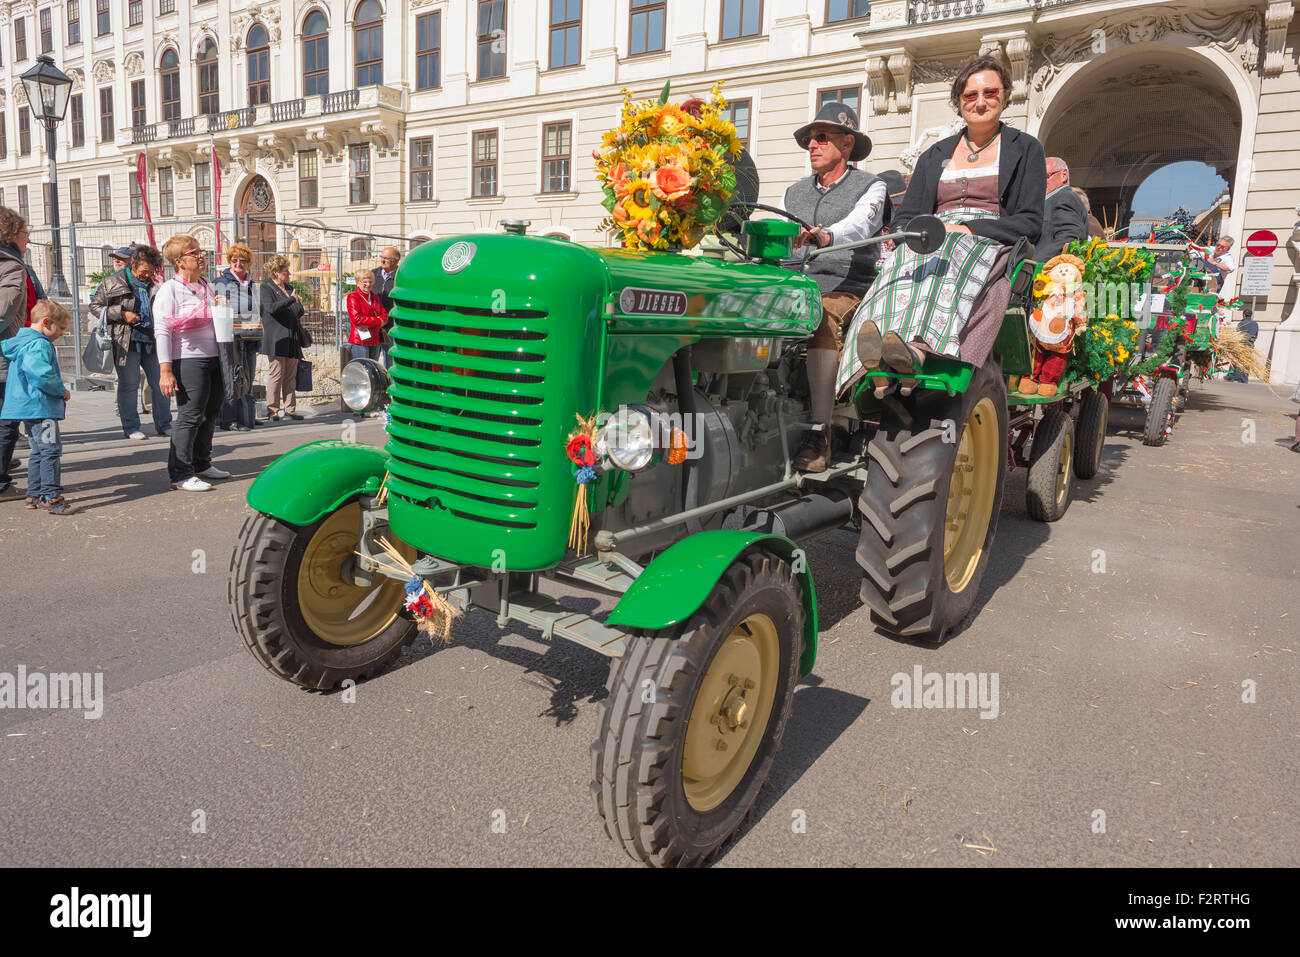 Austria farmer tractor, view of a farmer driving his tractor into the courtyard of the Hofburg Palace at harvest festival time, Wien, Austria. Stock Photo